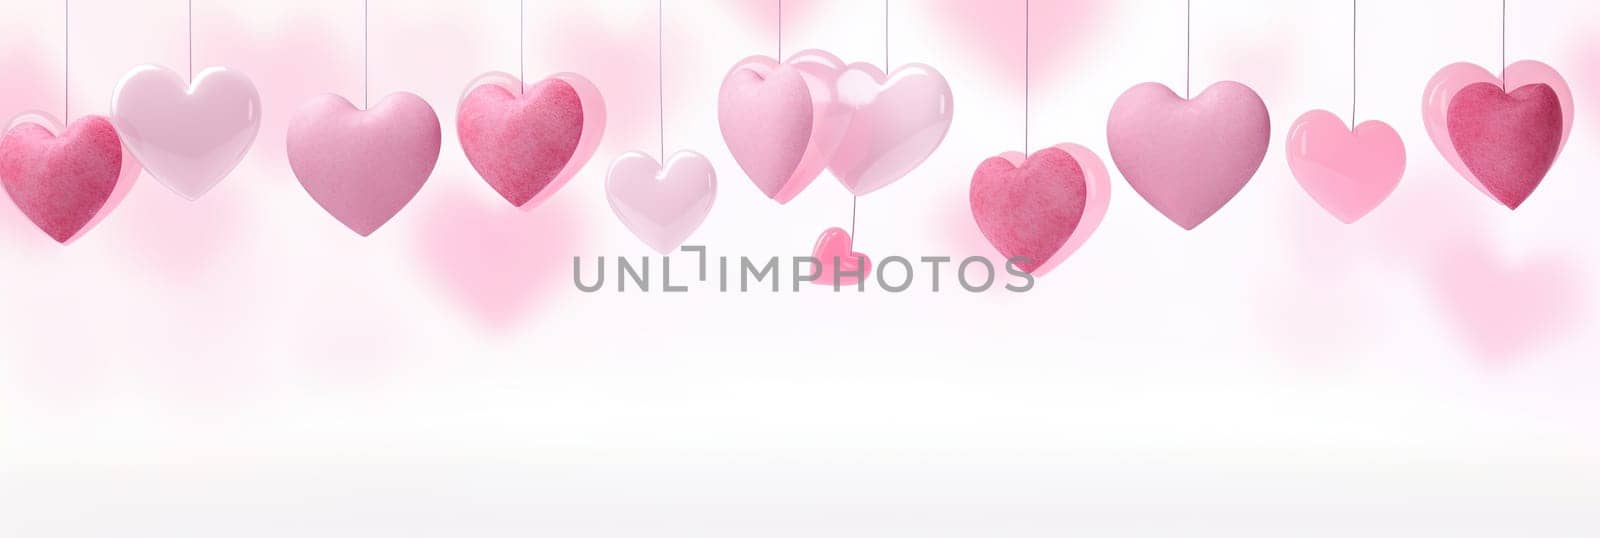 Illustration of defocused blurred pink hearts hanging from a white background. watercolor painting by papatonic